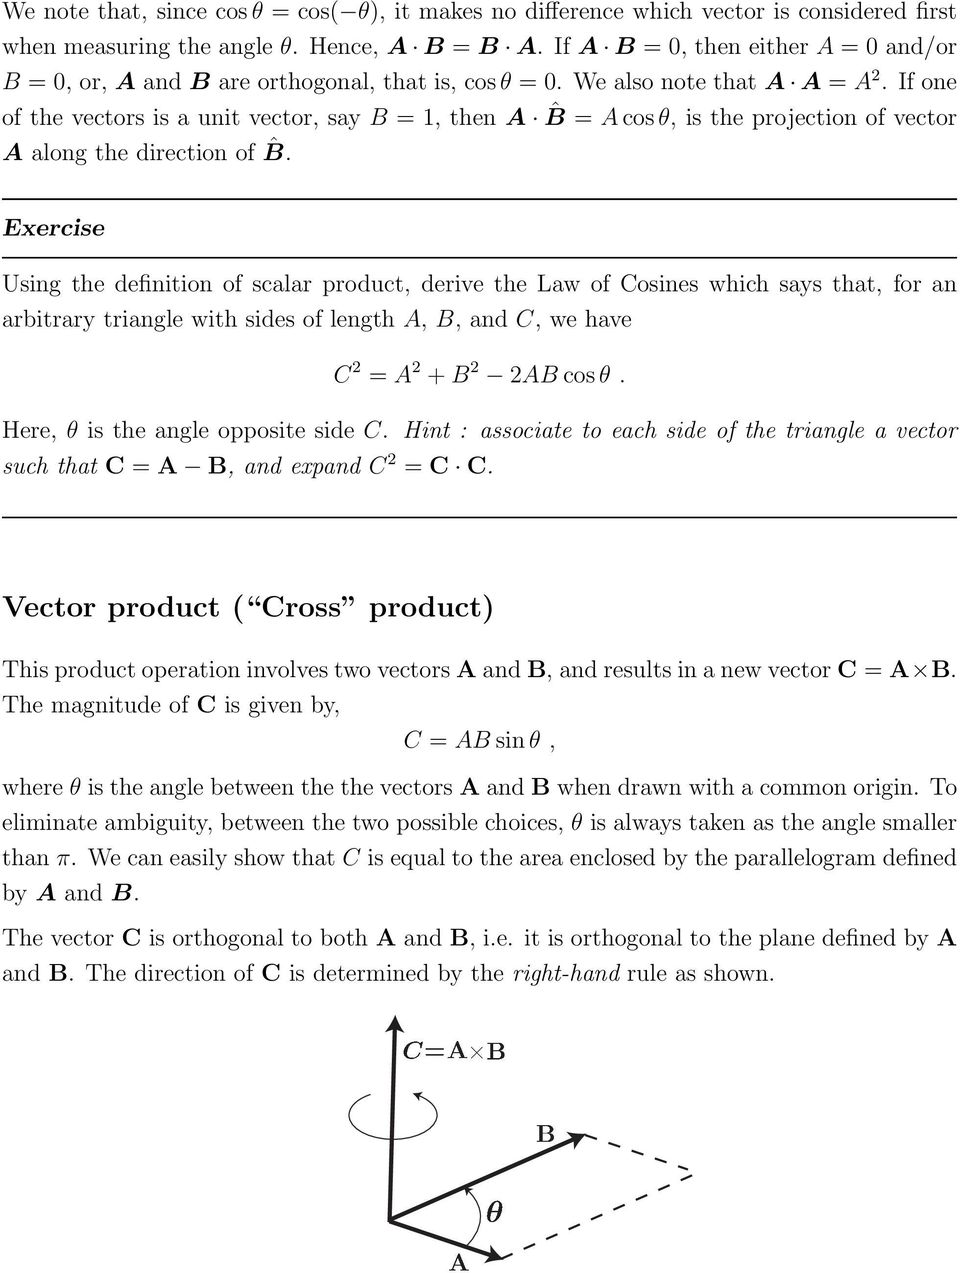 If one of the vectors is a unit vector, say B = 1, then A ˆB = A cos θ, is the projection of vector A along the direction of ˆB.